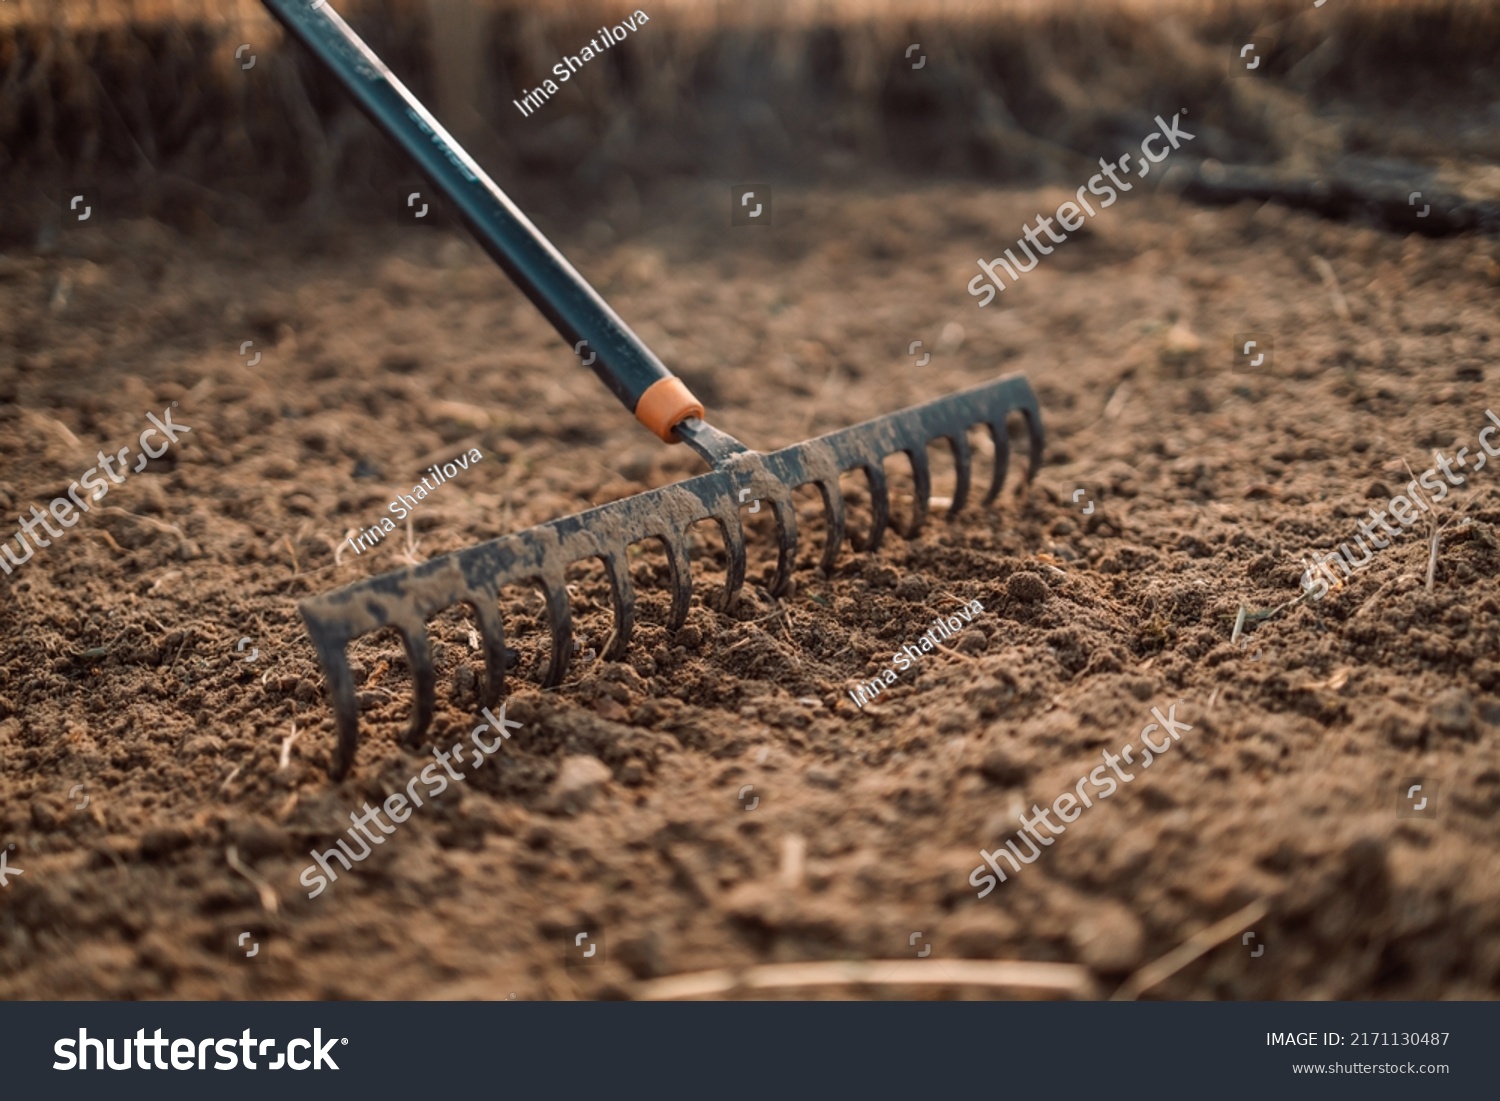 Loosening the soil with a rake in the greenhouse. Close up of an new metal garden rake cleaning earth at spring time #2171130487